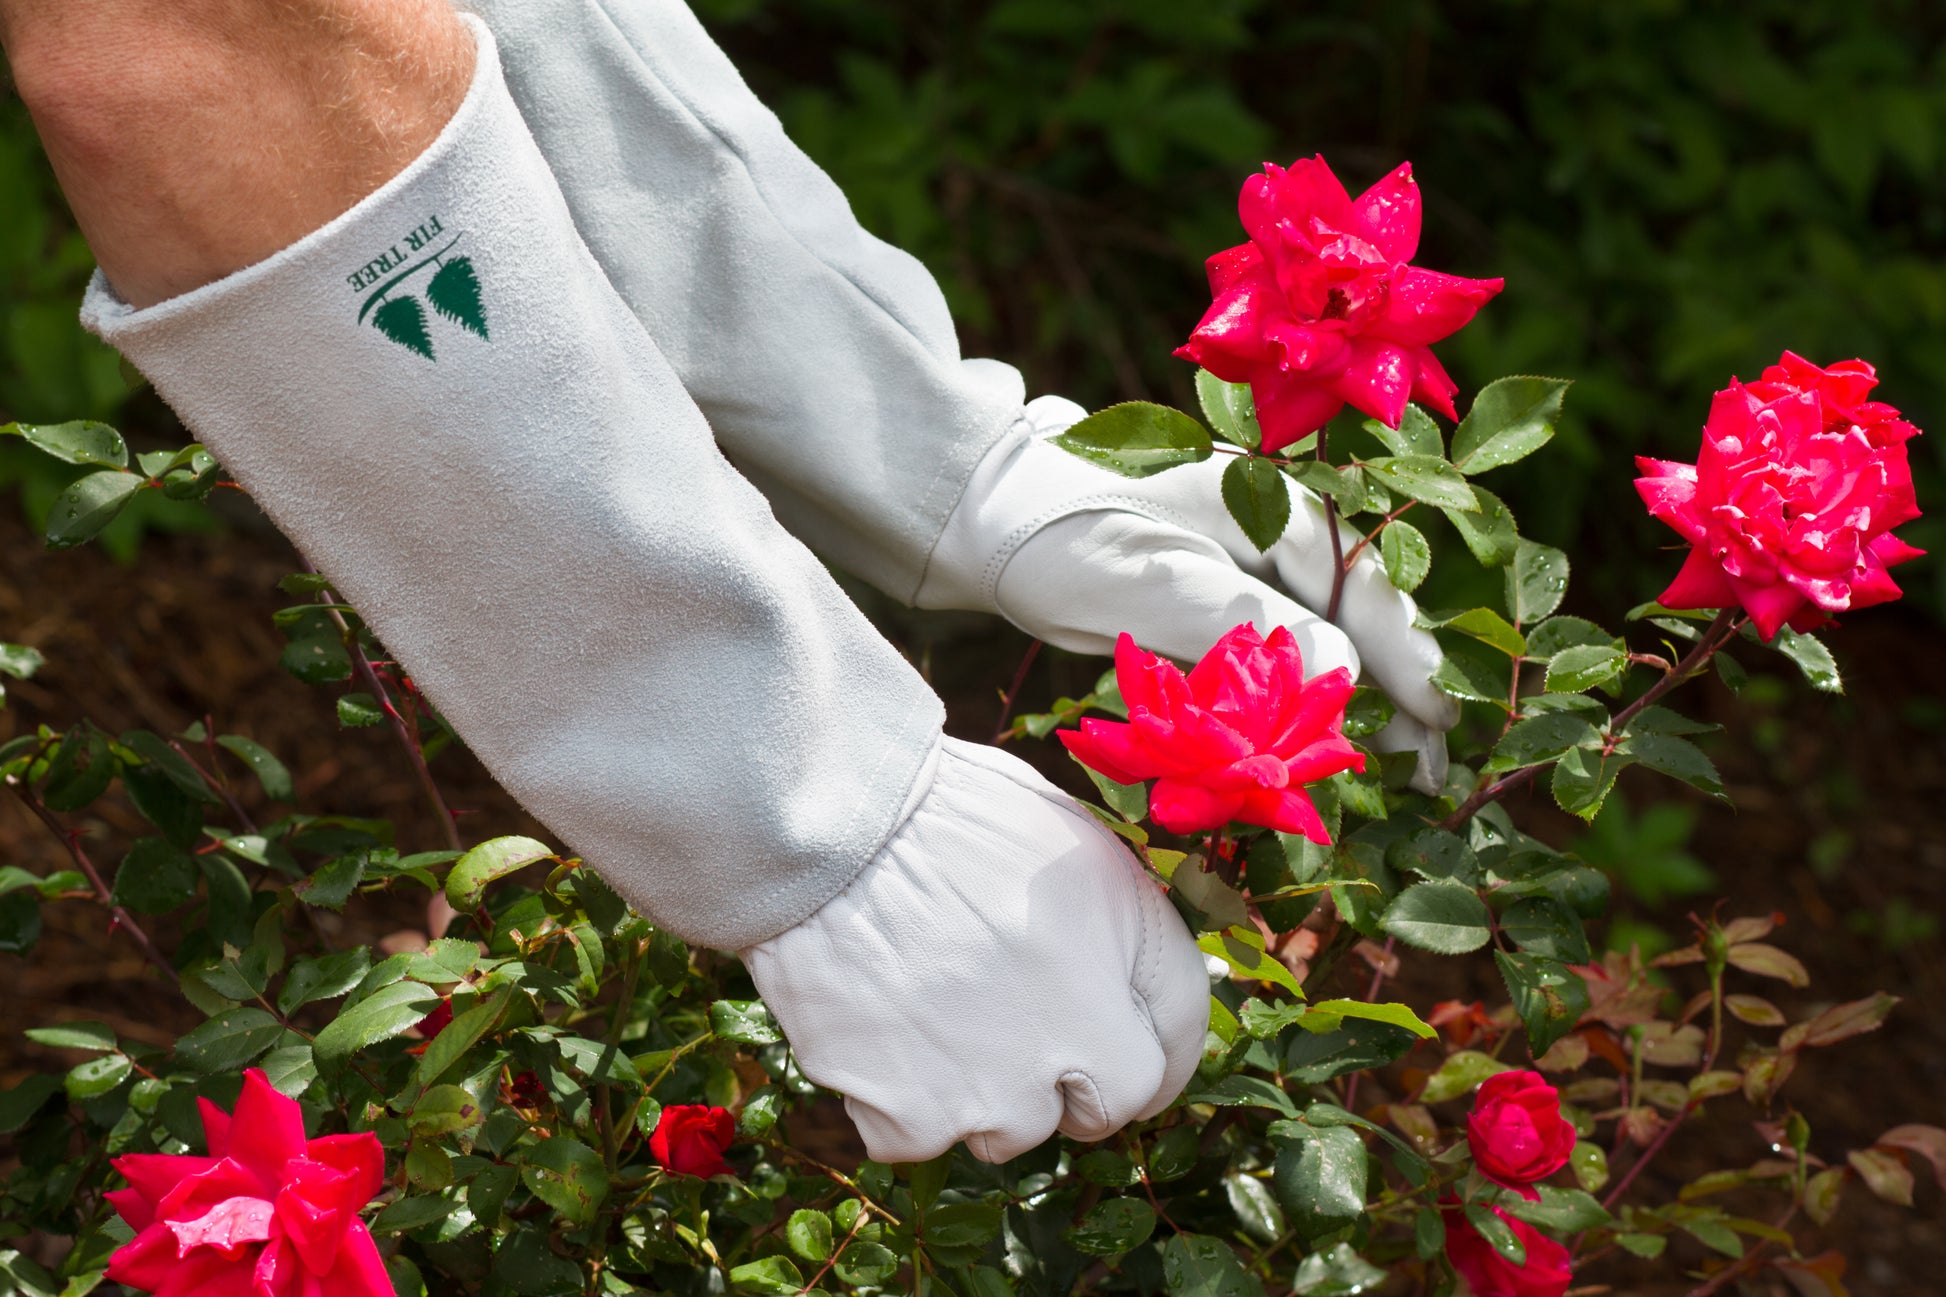 Goatskin Gardening Gloves Leather is recognized as the most protective